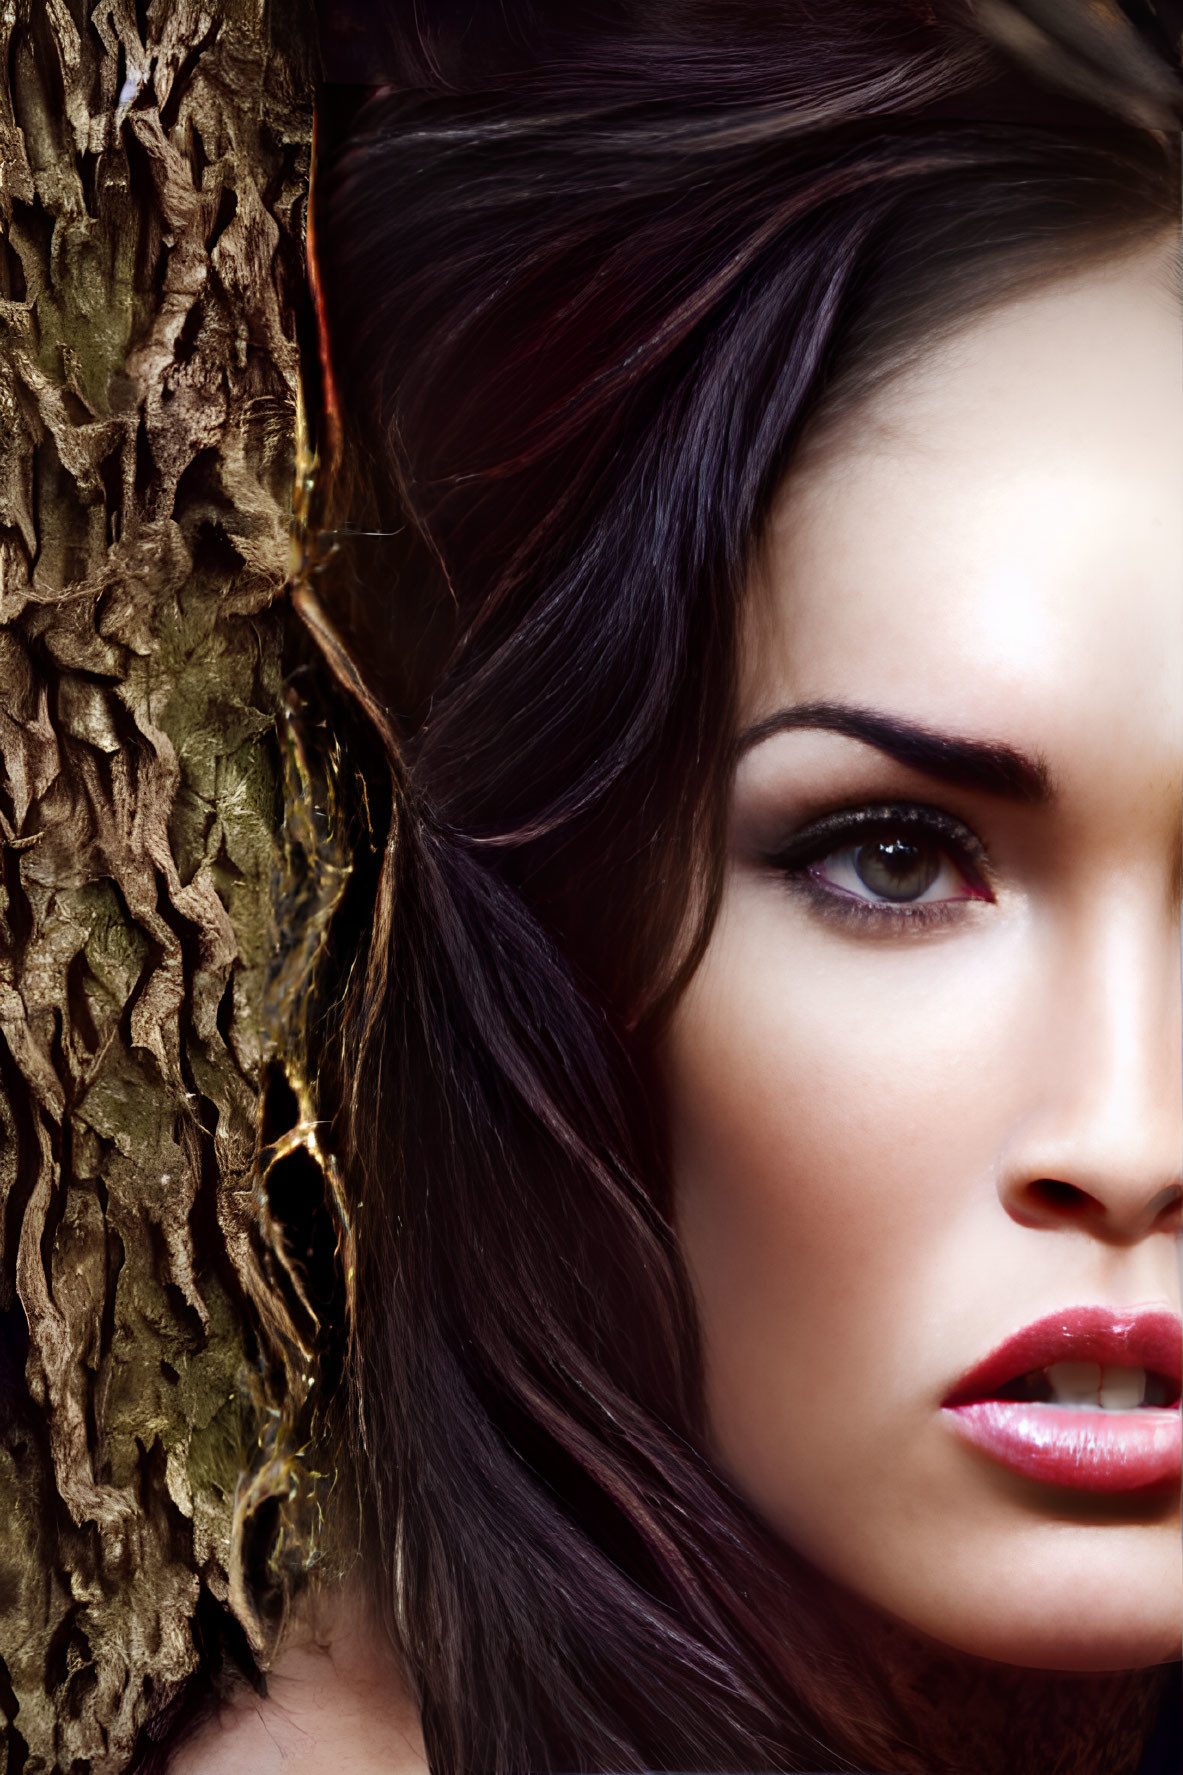 Close-Up Woman's Face with Focused Eyes and Prominent Makeup Near Tree Bark